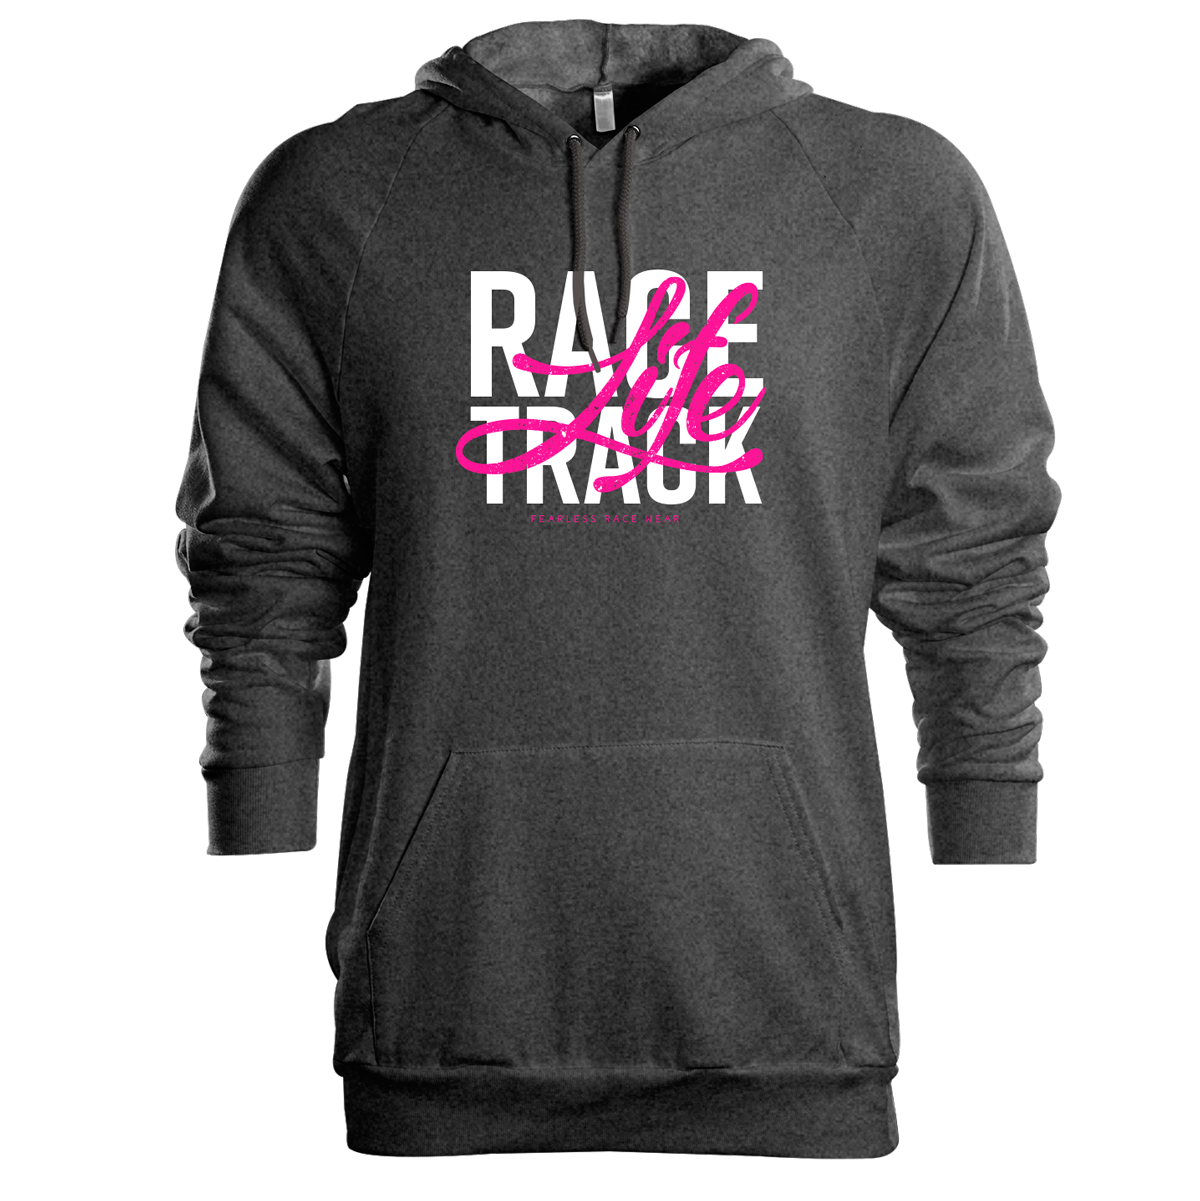 Racetrack Life or Race T-Shirts Print + | Red Wear Fuchsia Fearless Hoodies 